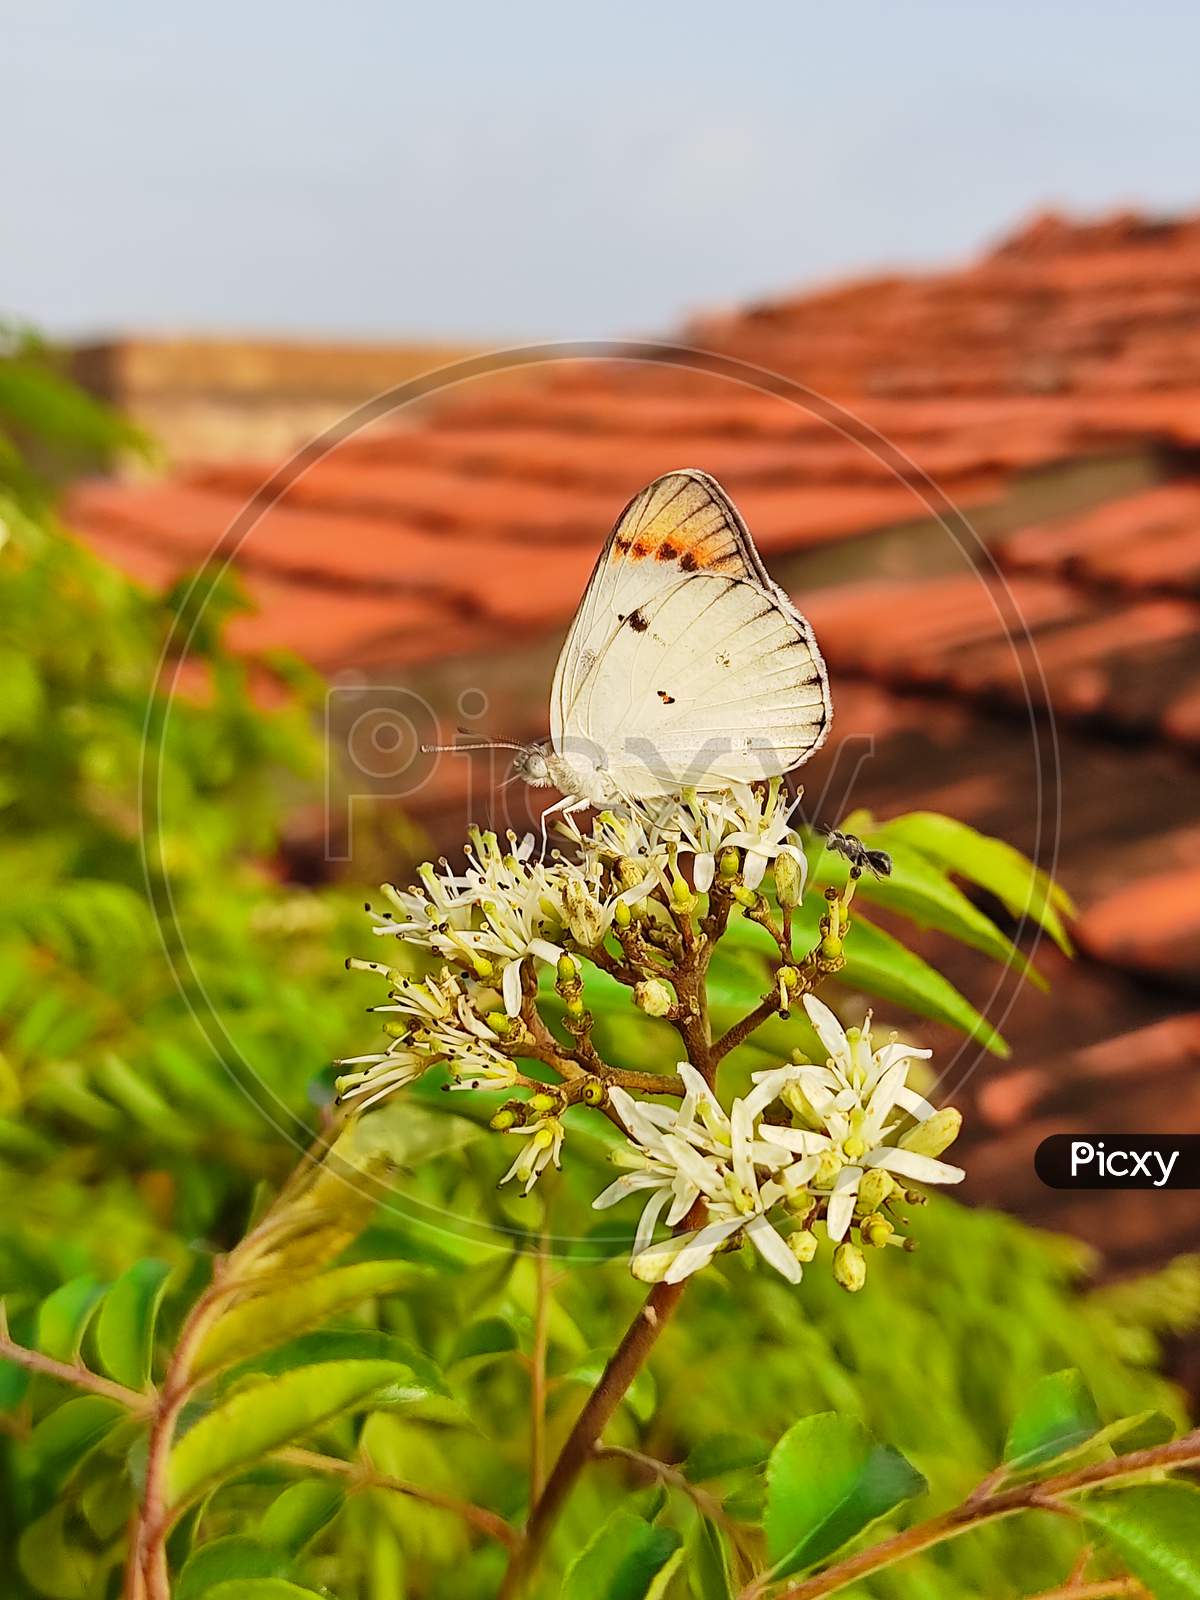 Colotis butterfly